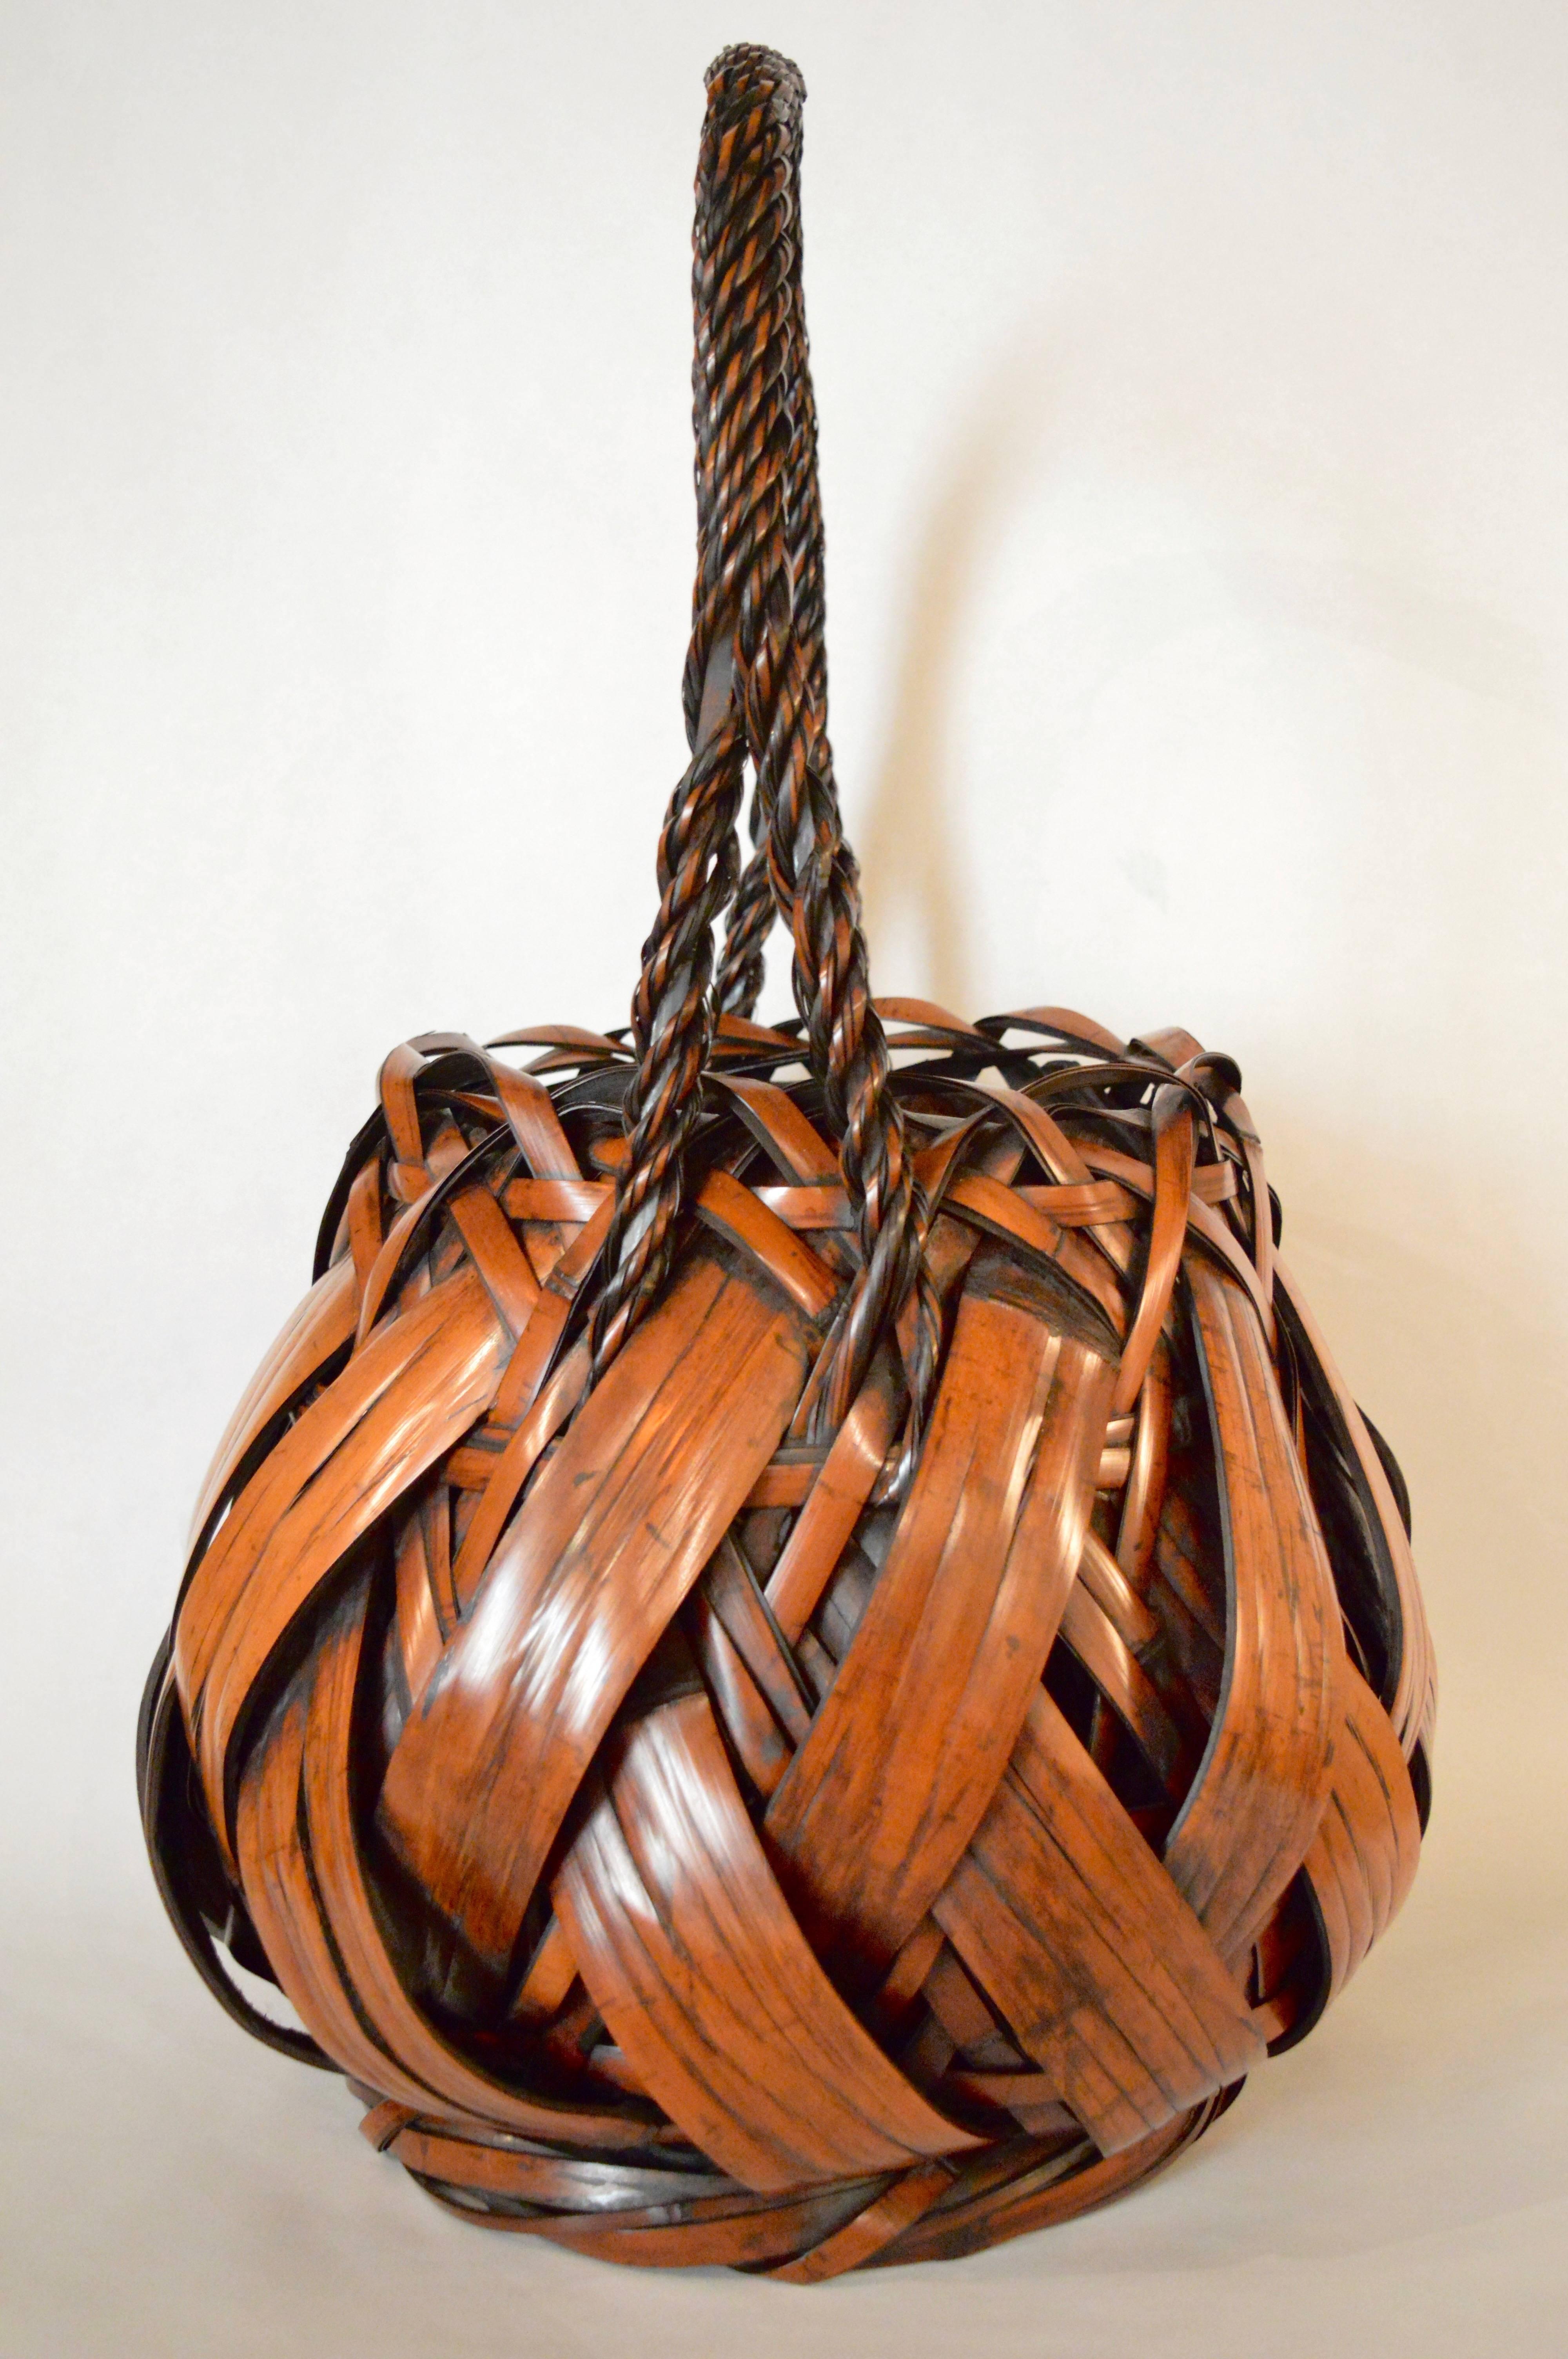 Antique Japanese ikebana basket made of woven bamboo with large strips of bamboo interwoven with a network of thinner strips and a tightly twisted handle Spectacular size.
Meiji period.